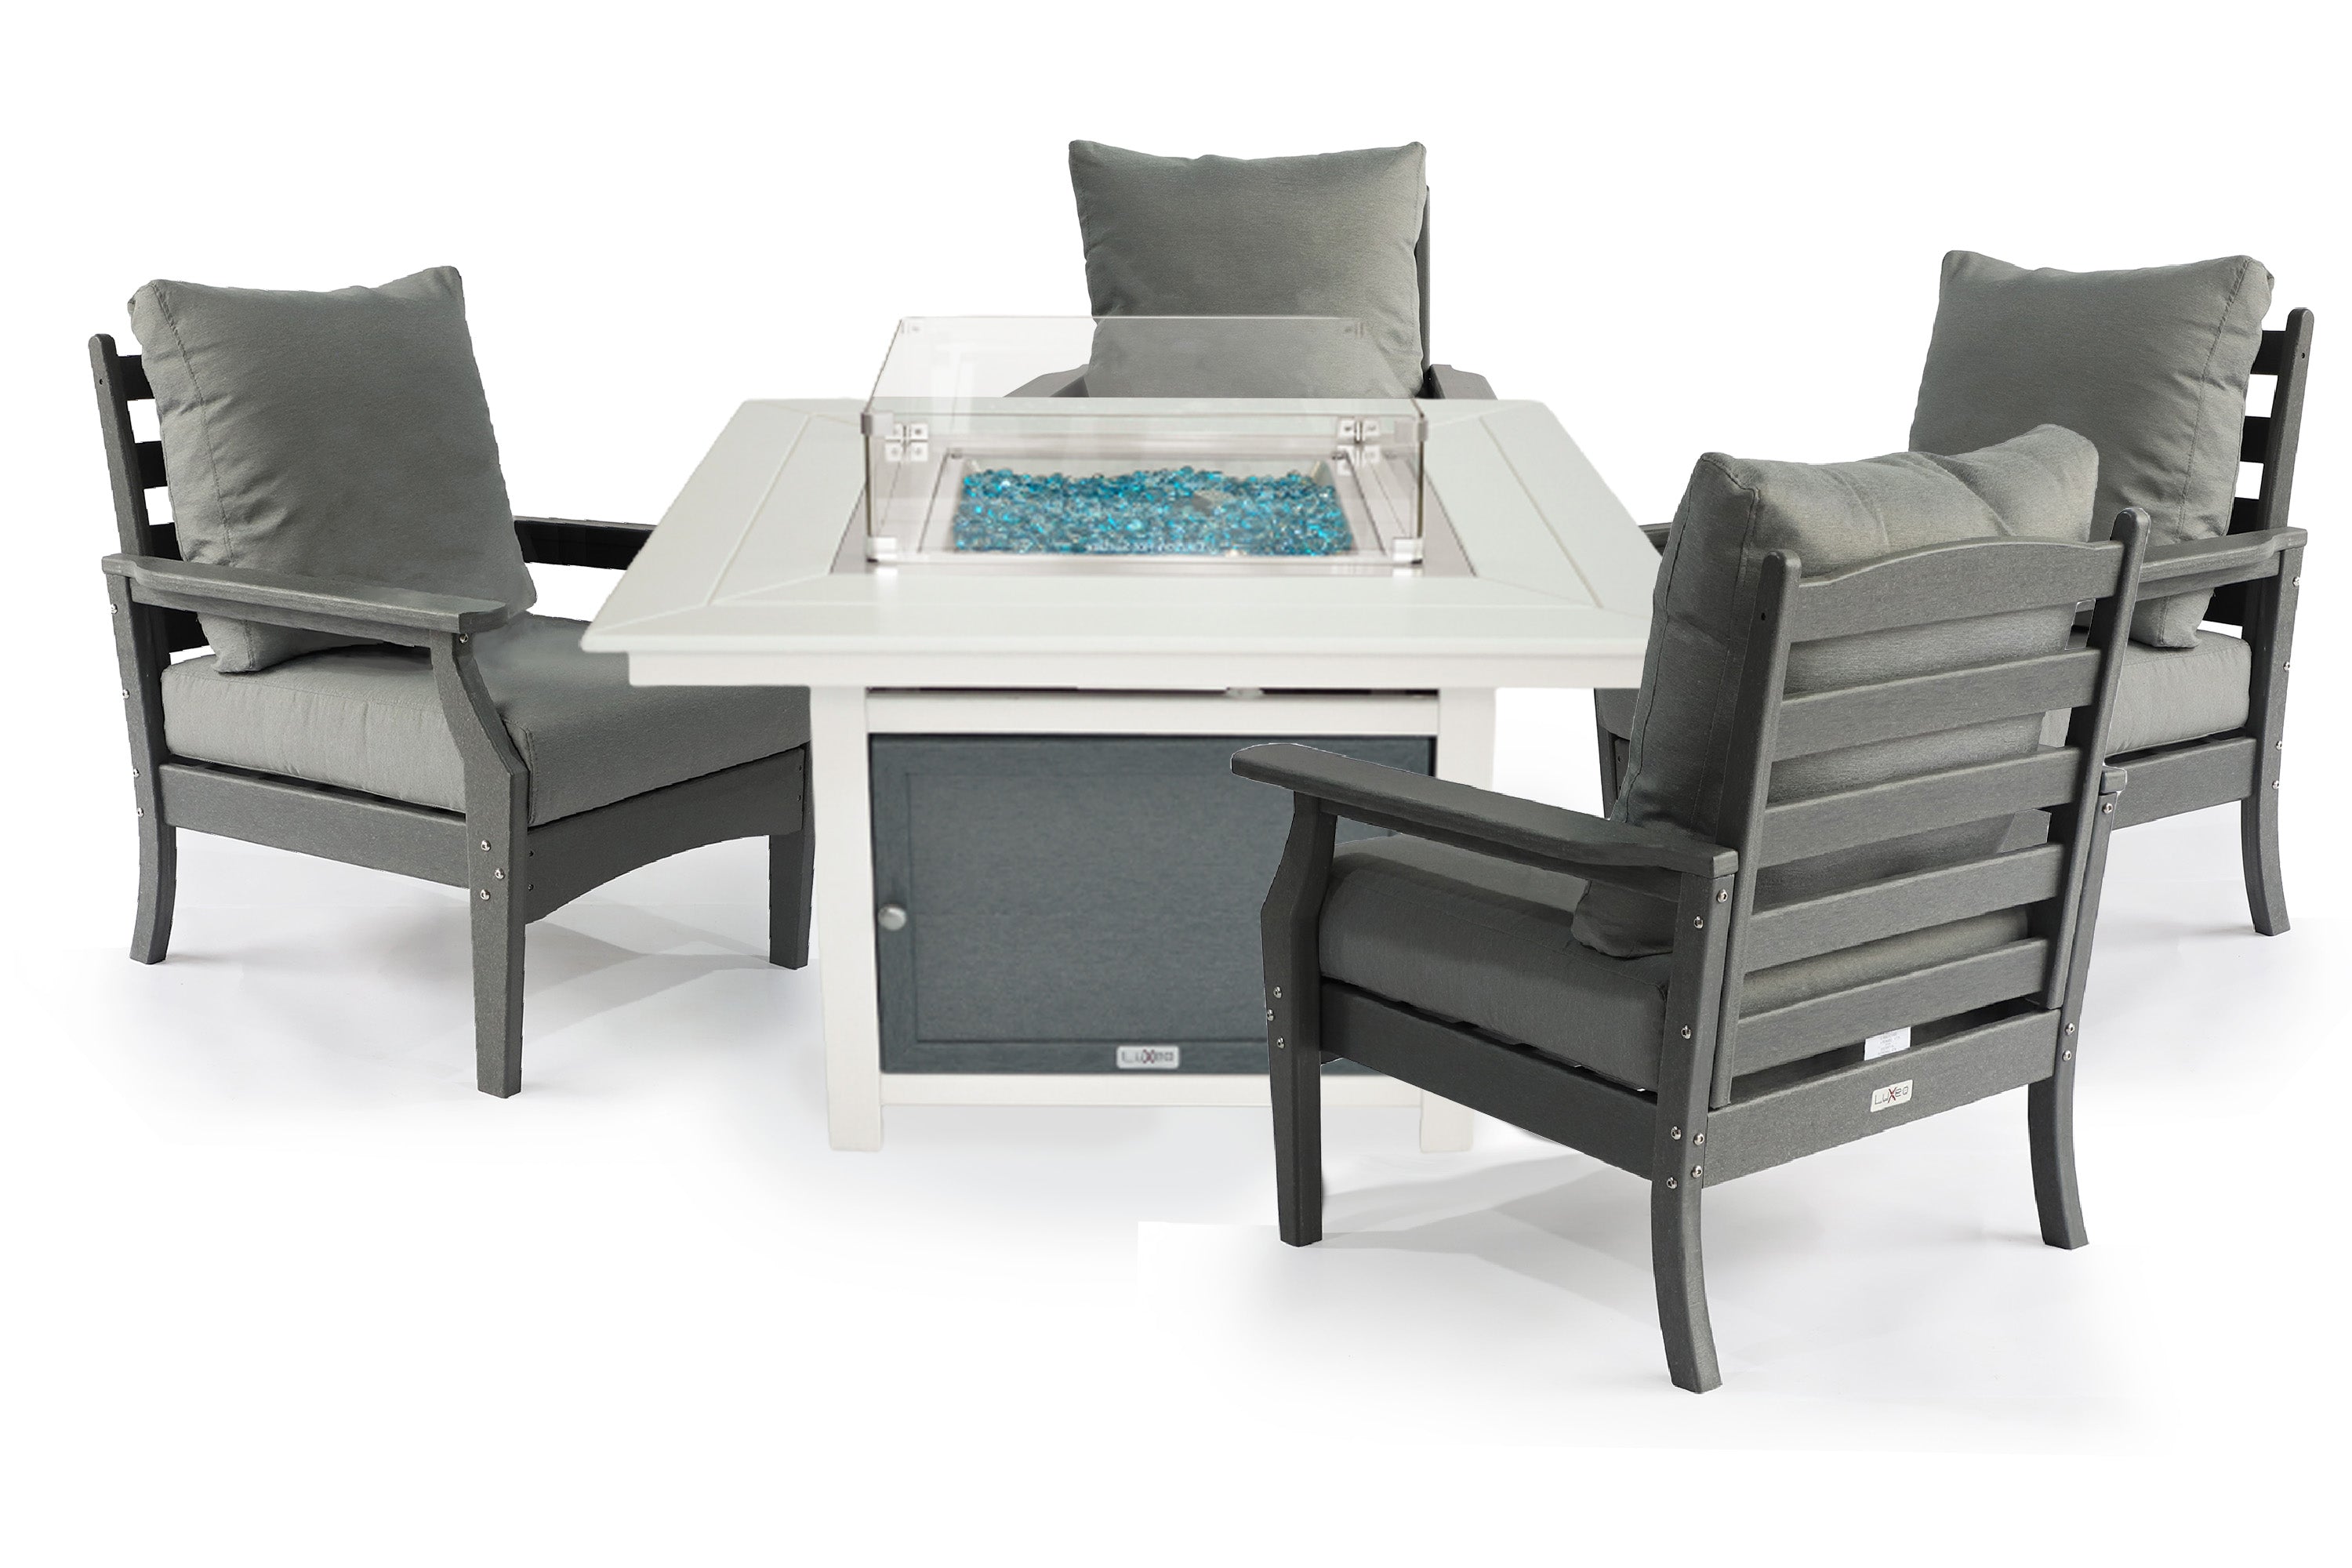 LuXeo Park City 42" Two Tone Fire Pit, Square Top with Four Aspen Chairs